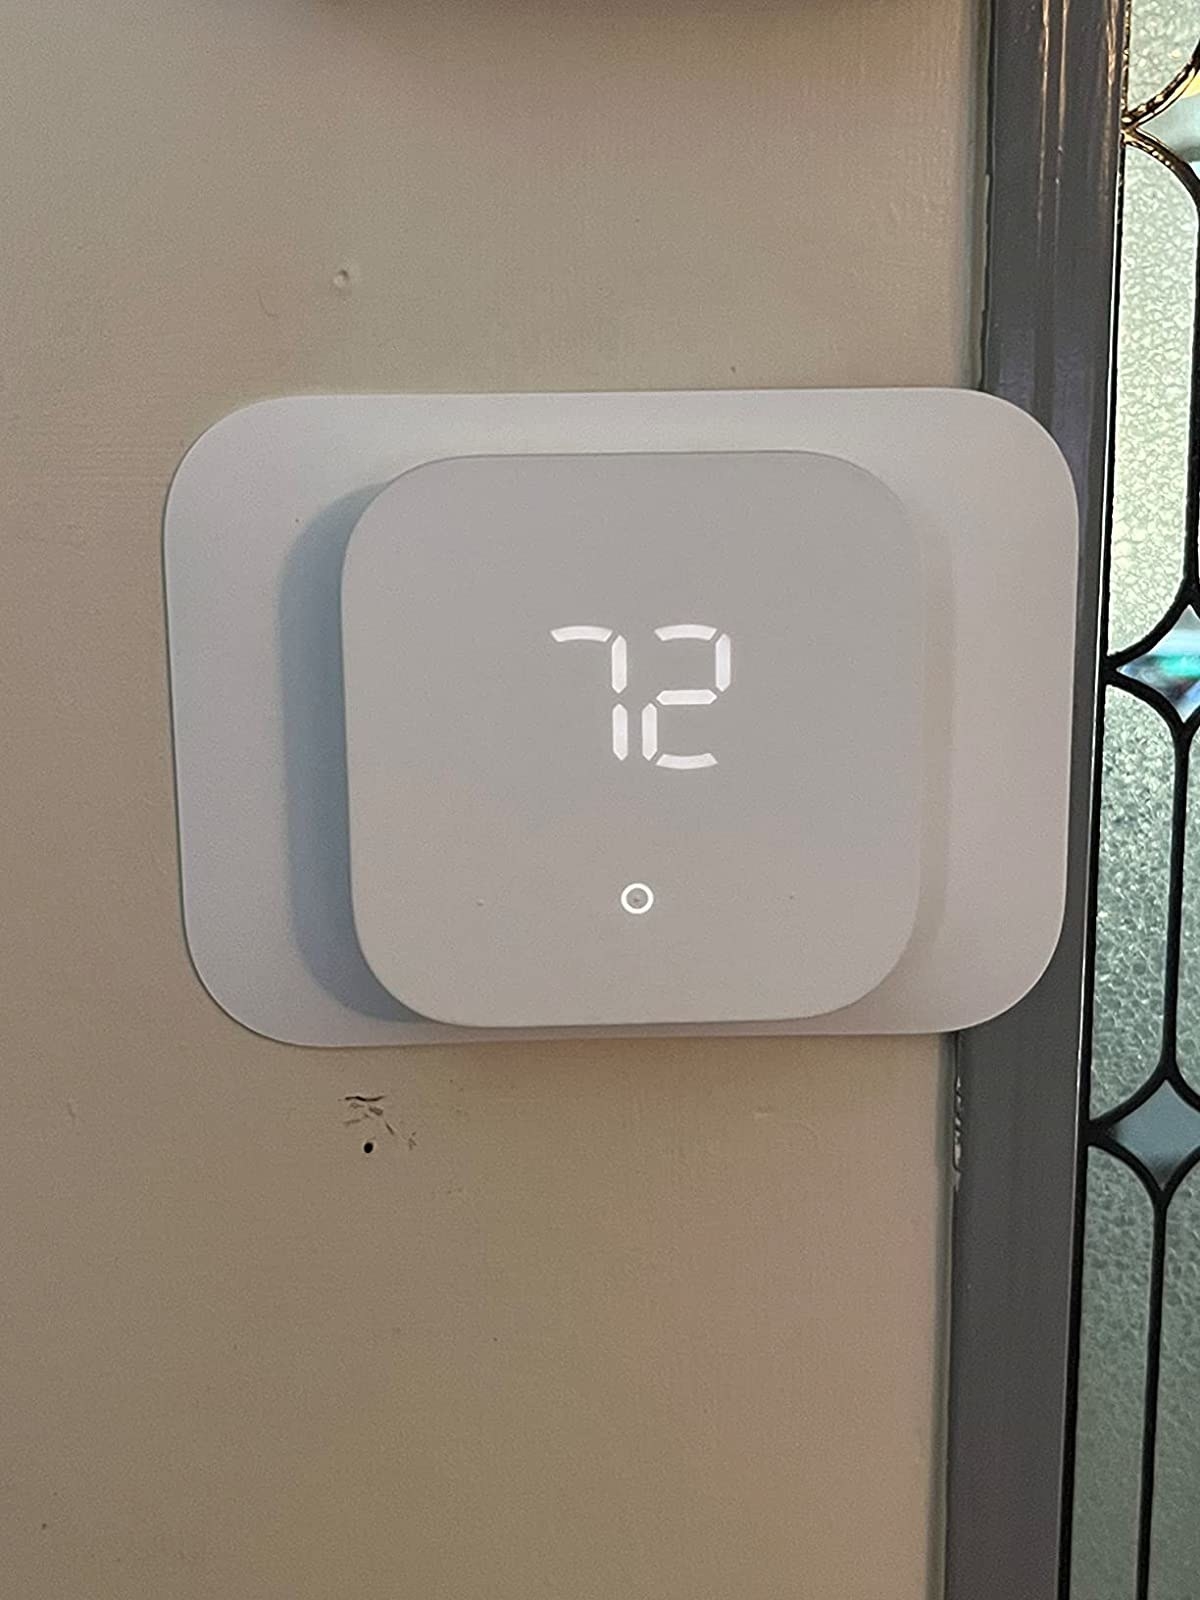 Reviewer image of thermostat on the wall